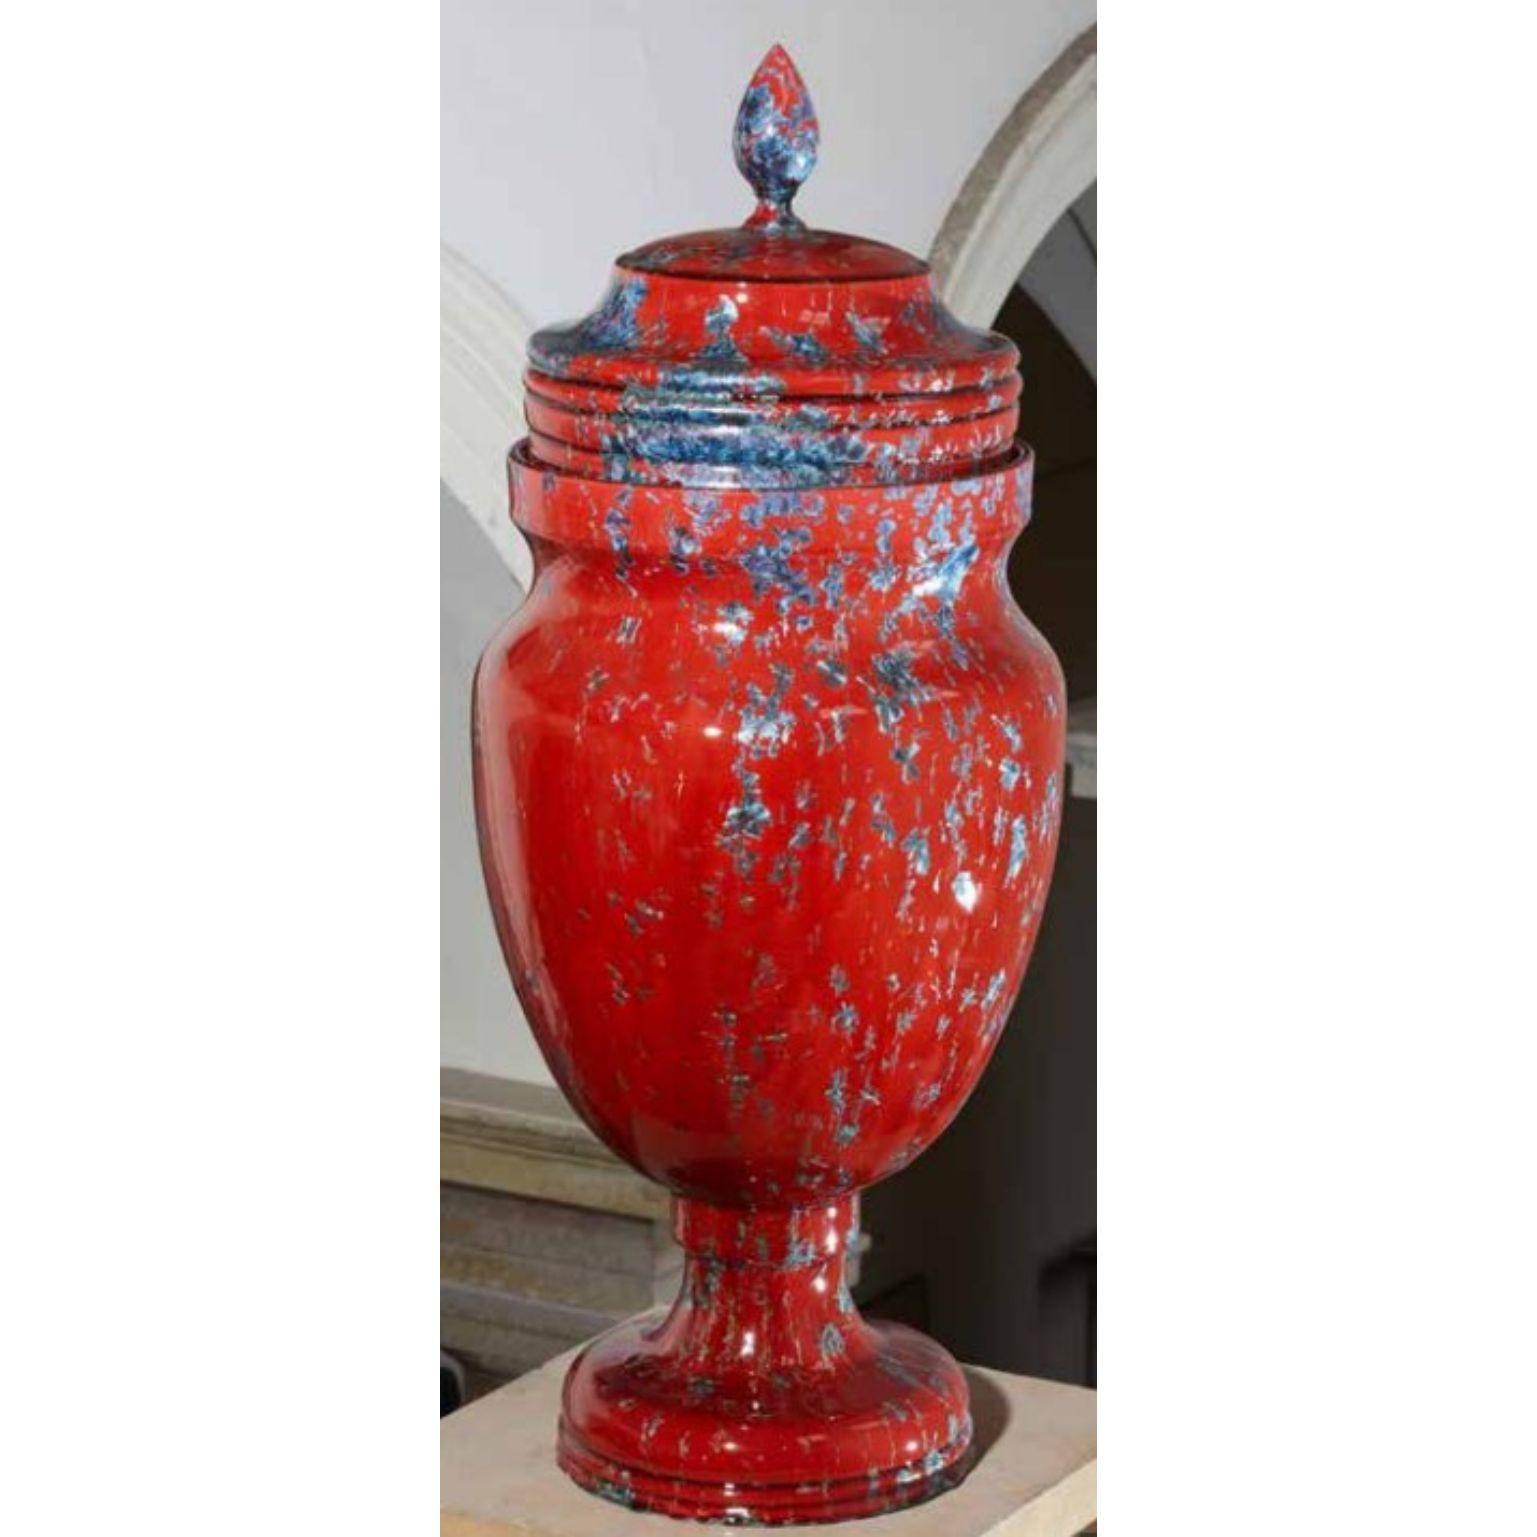 Vase in Louis XVI style by Milan Pekar
Dimensions: D x H 98 cm
Materials: Red porcelain slip, crystal glaze, stoneware

Hand-made in the Czech Republic. 

Established own studio August 2009  focus mainly on porcelain, developing own glazes.